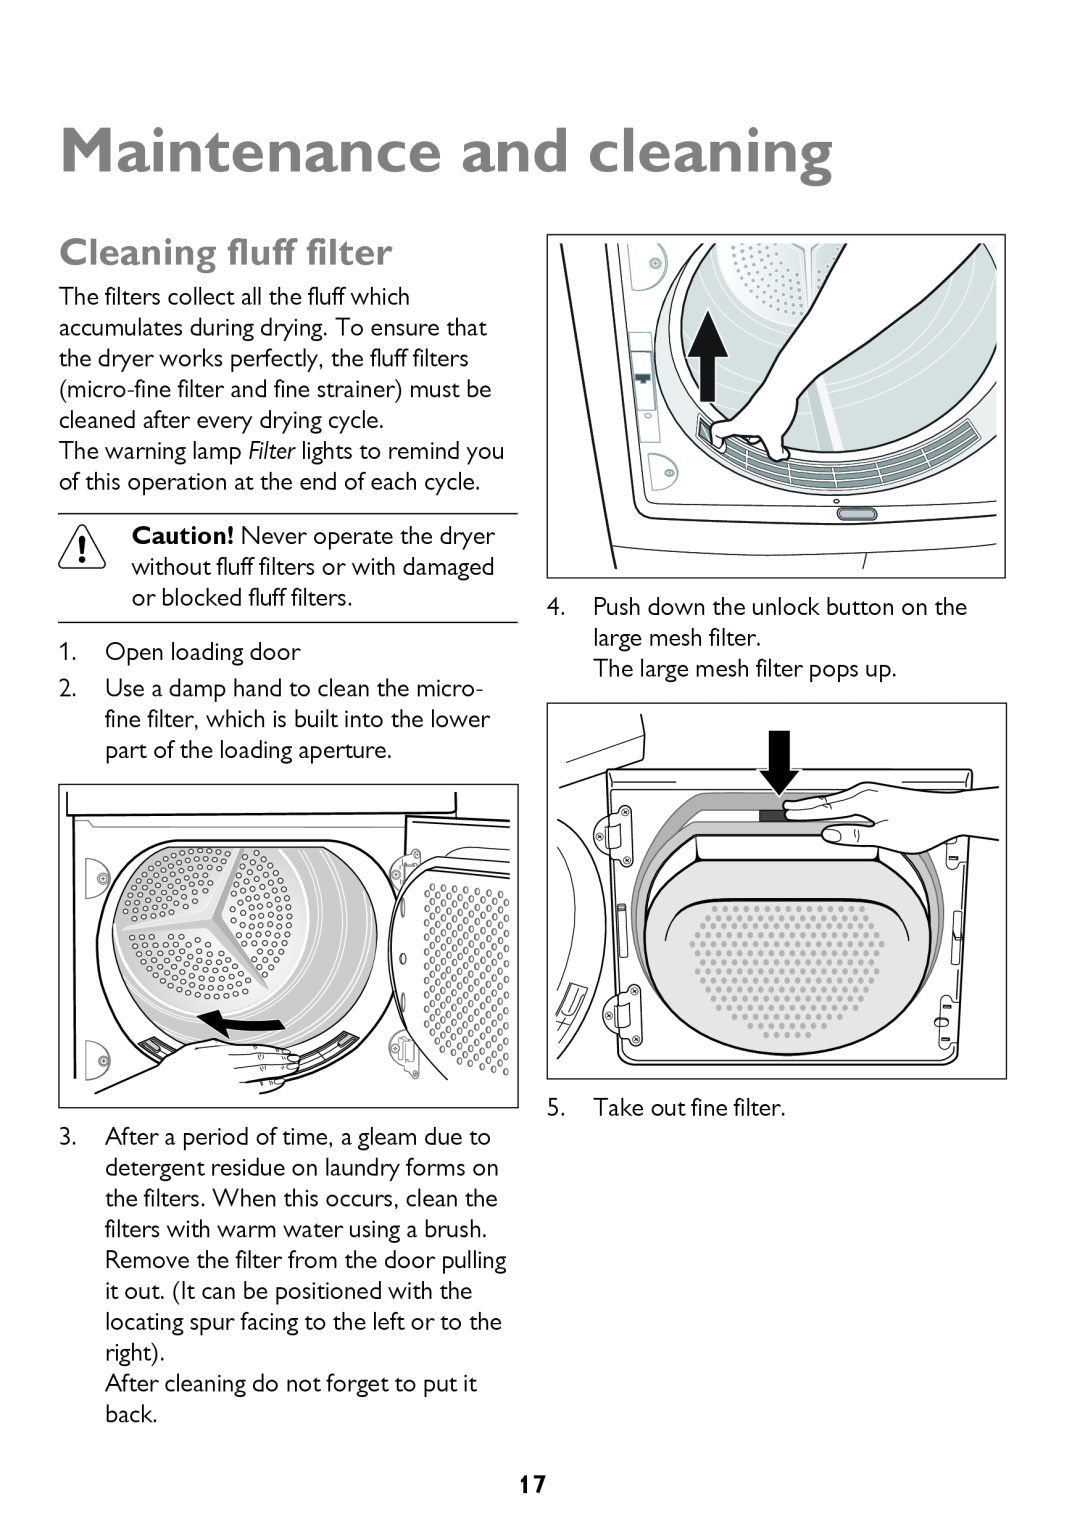 John Lewis JLTDH15 instruction manual Maintenance and cleaning, Cleaning fluff filter 